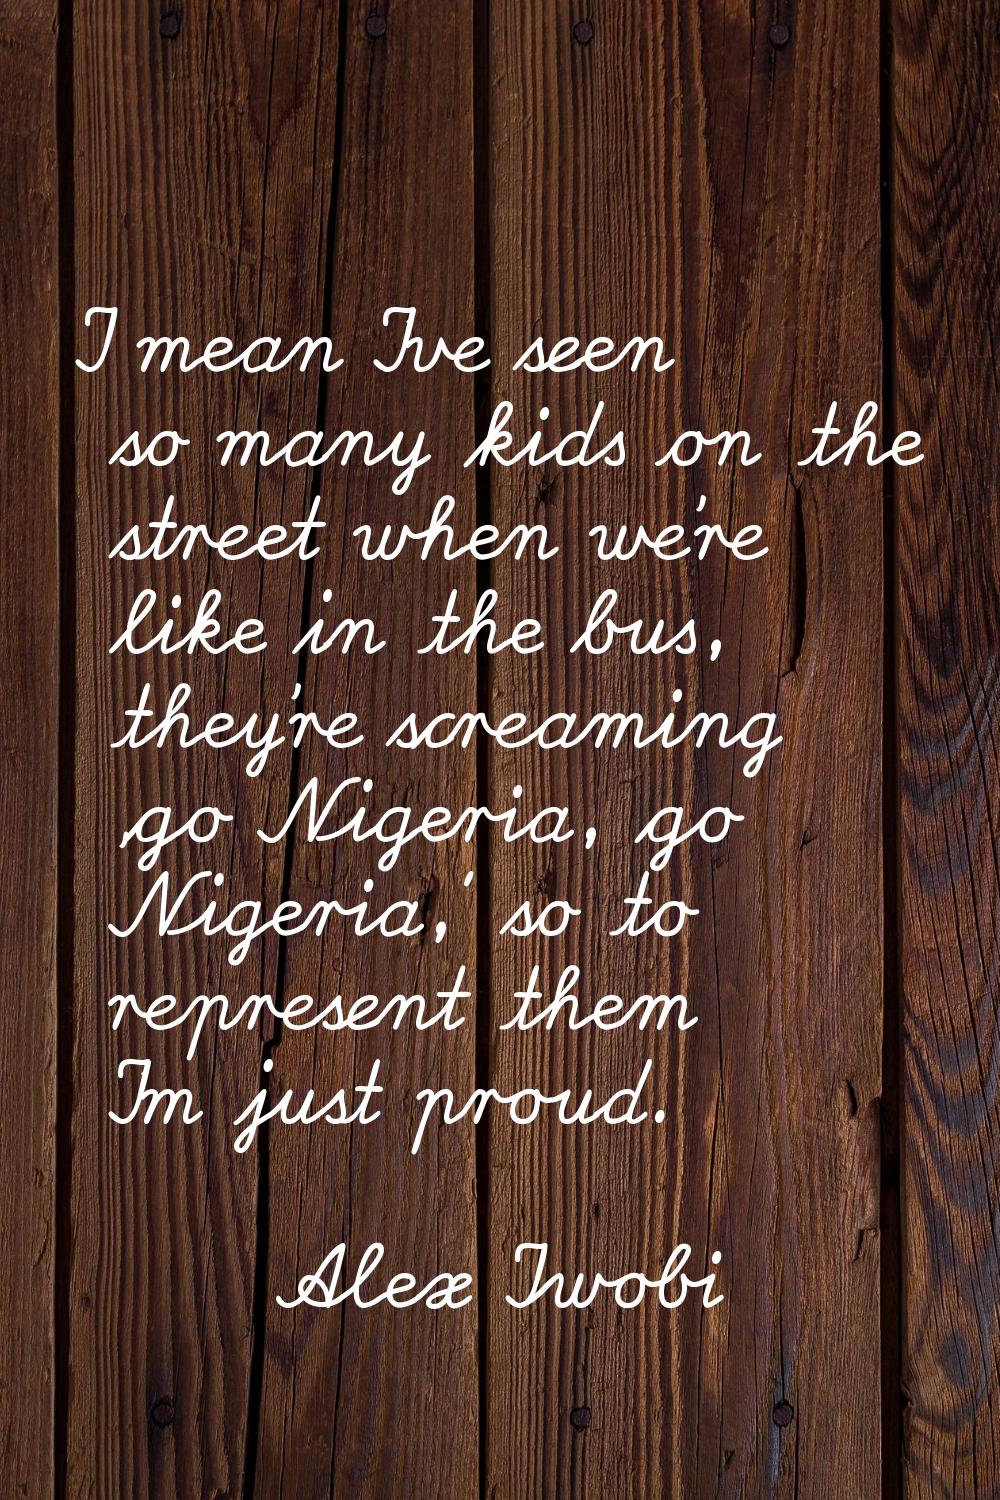 I mean I've seen so many kids on the street when we're like in the bus, they're screaming 'go Niger